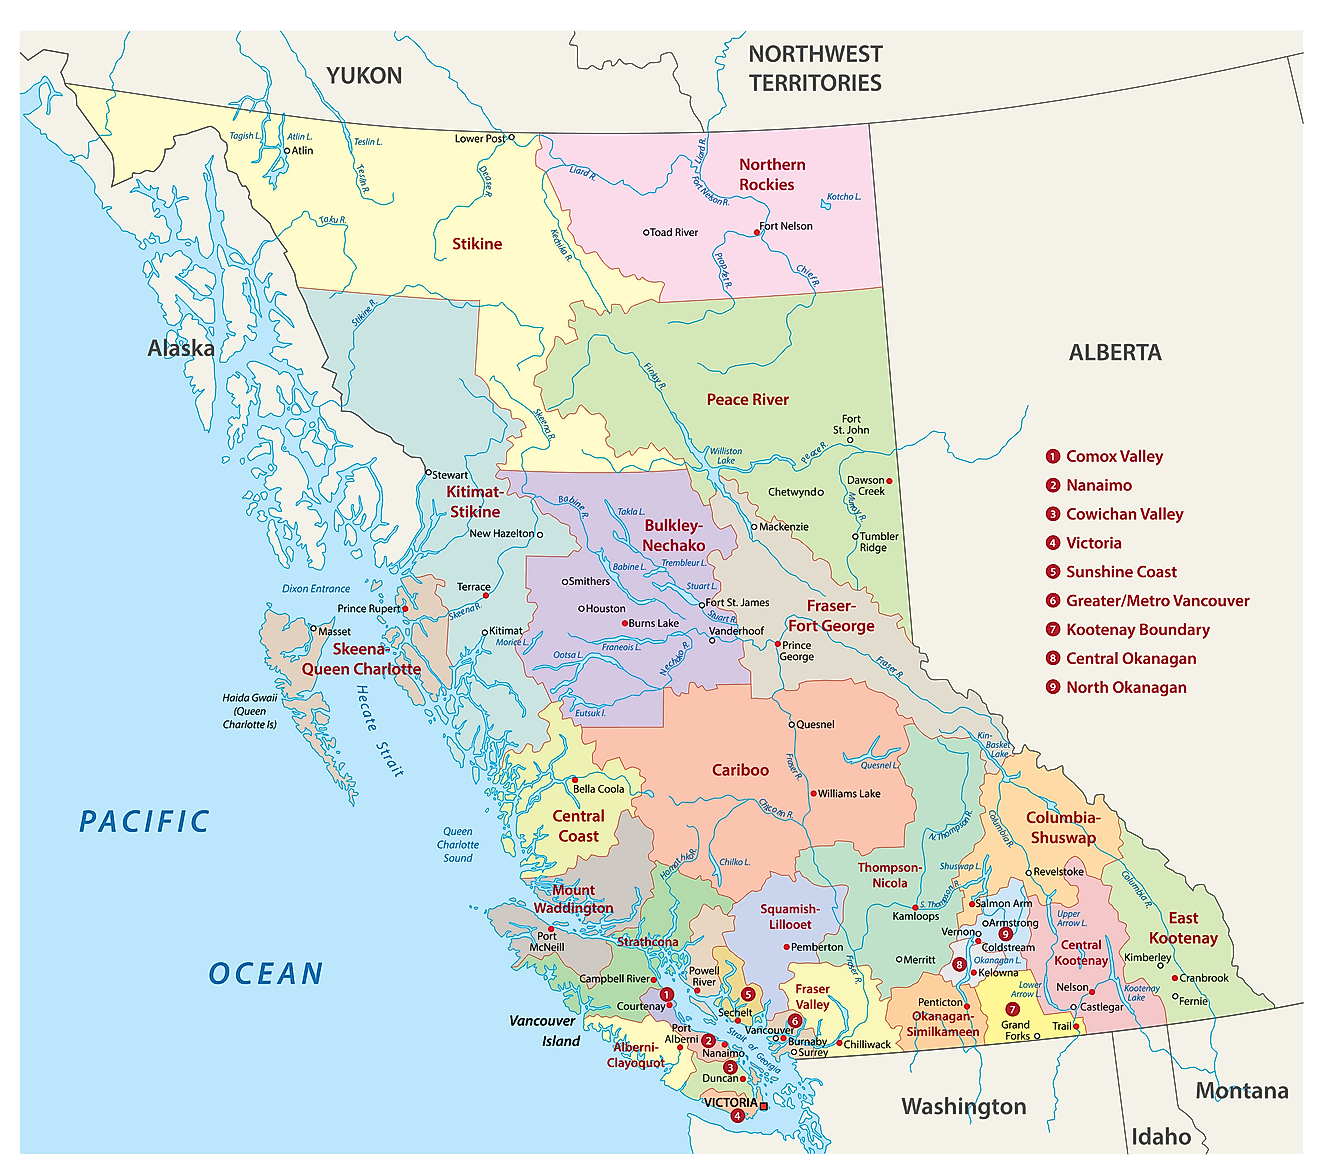 British Columbia - Climate, Mountains, Pacific